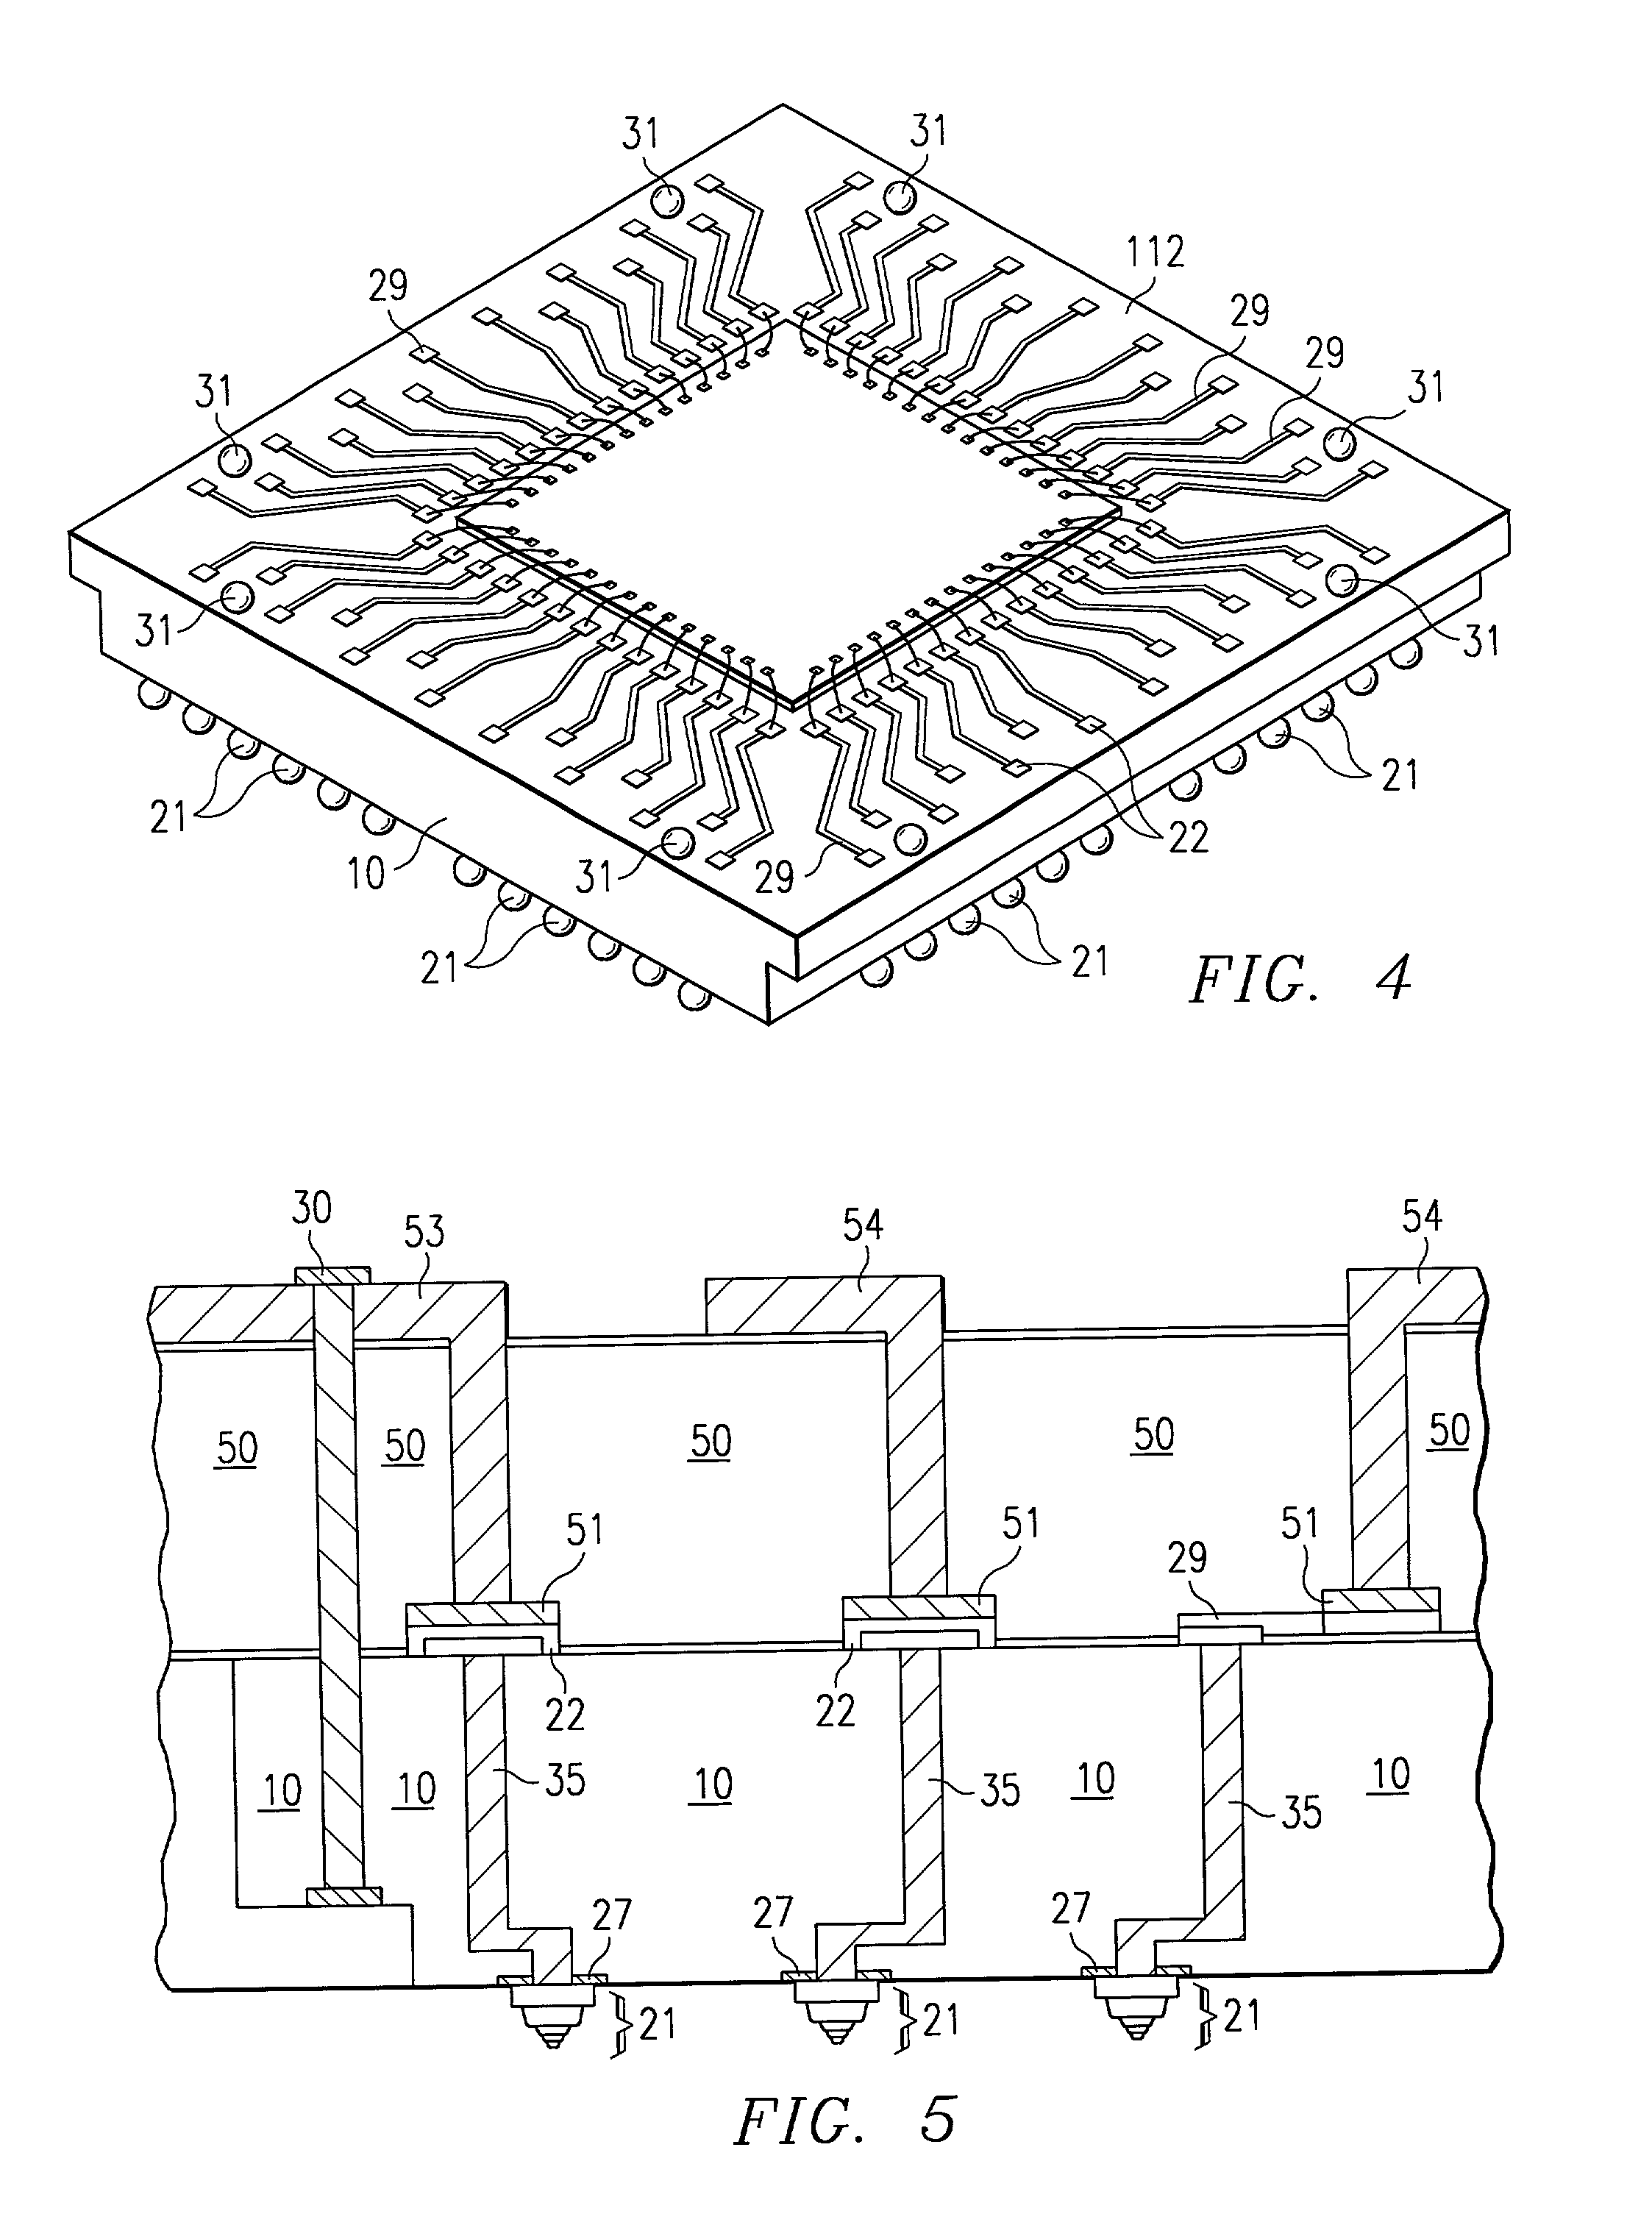 Multiple-chip probe and universal tester contact assemblage